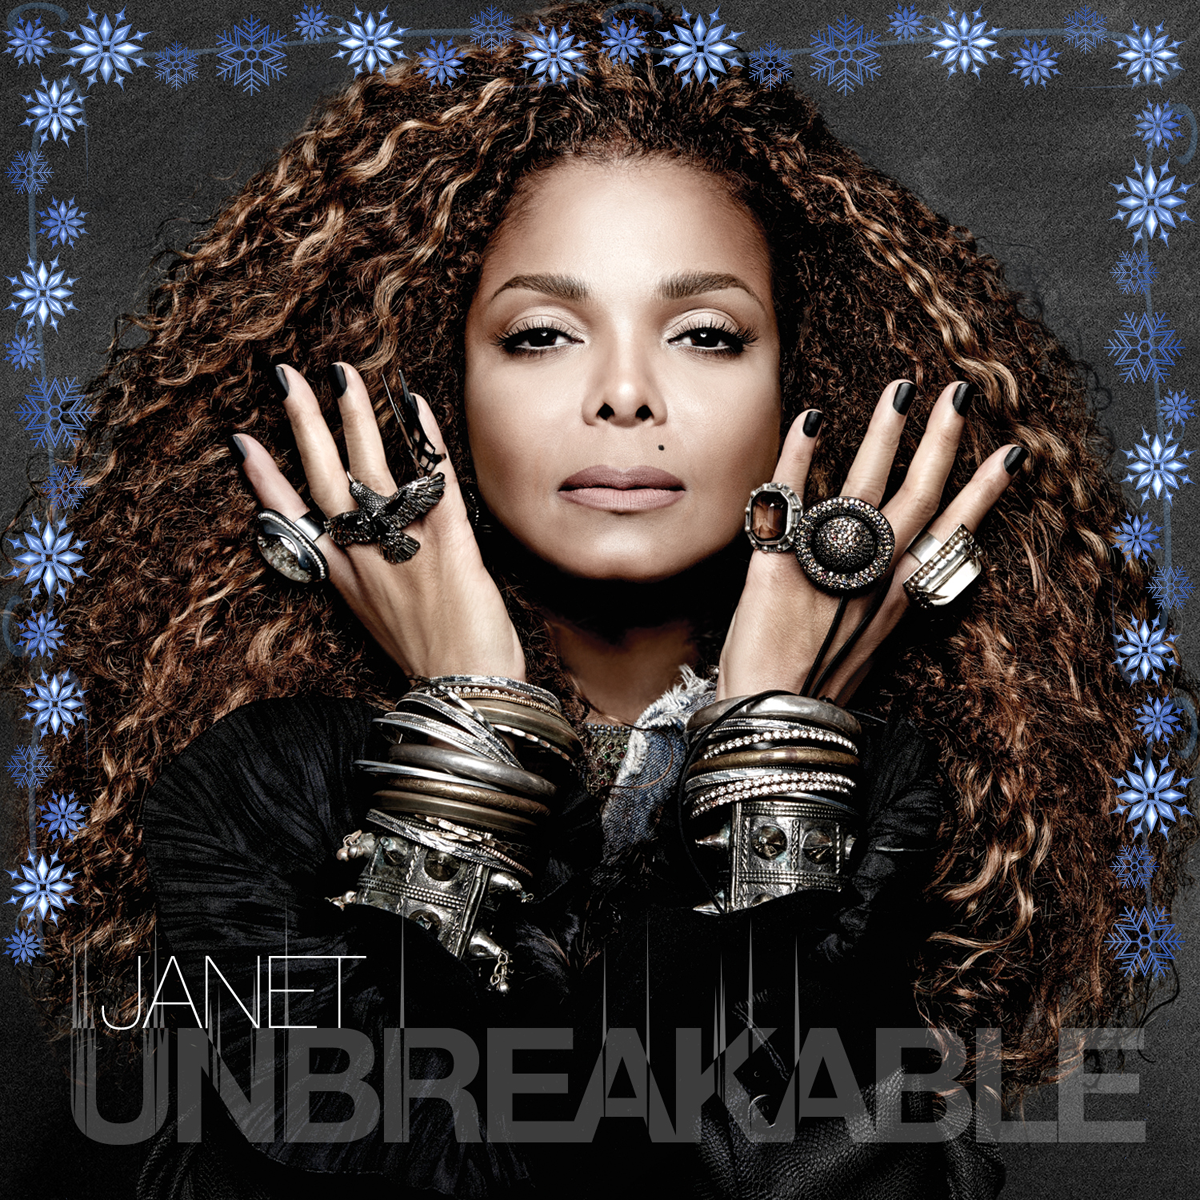 Wishing you light, love, health and happiness this holiday season! Love, Janet https://t.co/8HoRYaOh0F